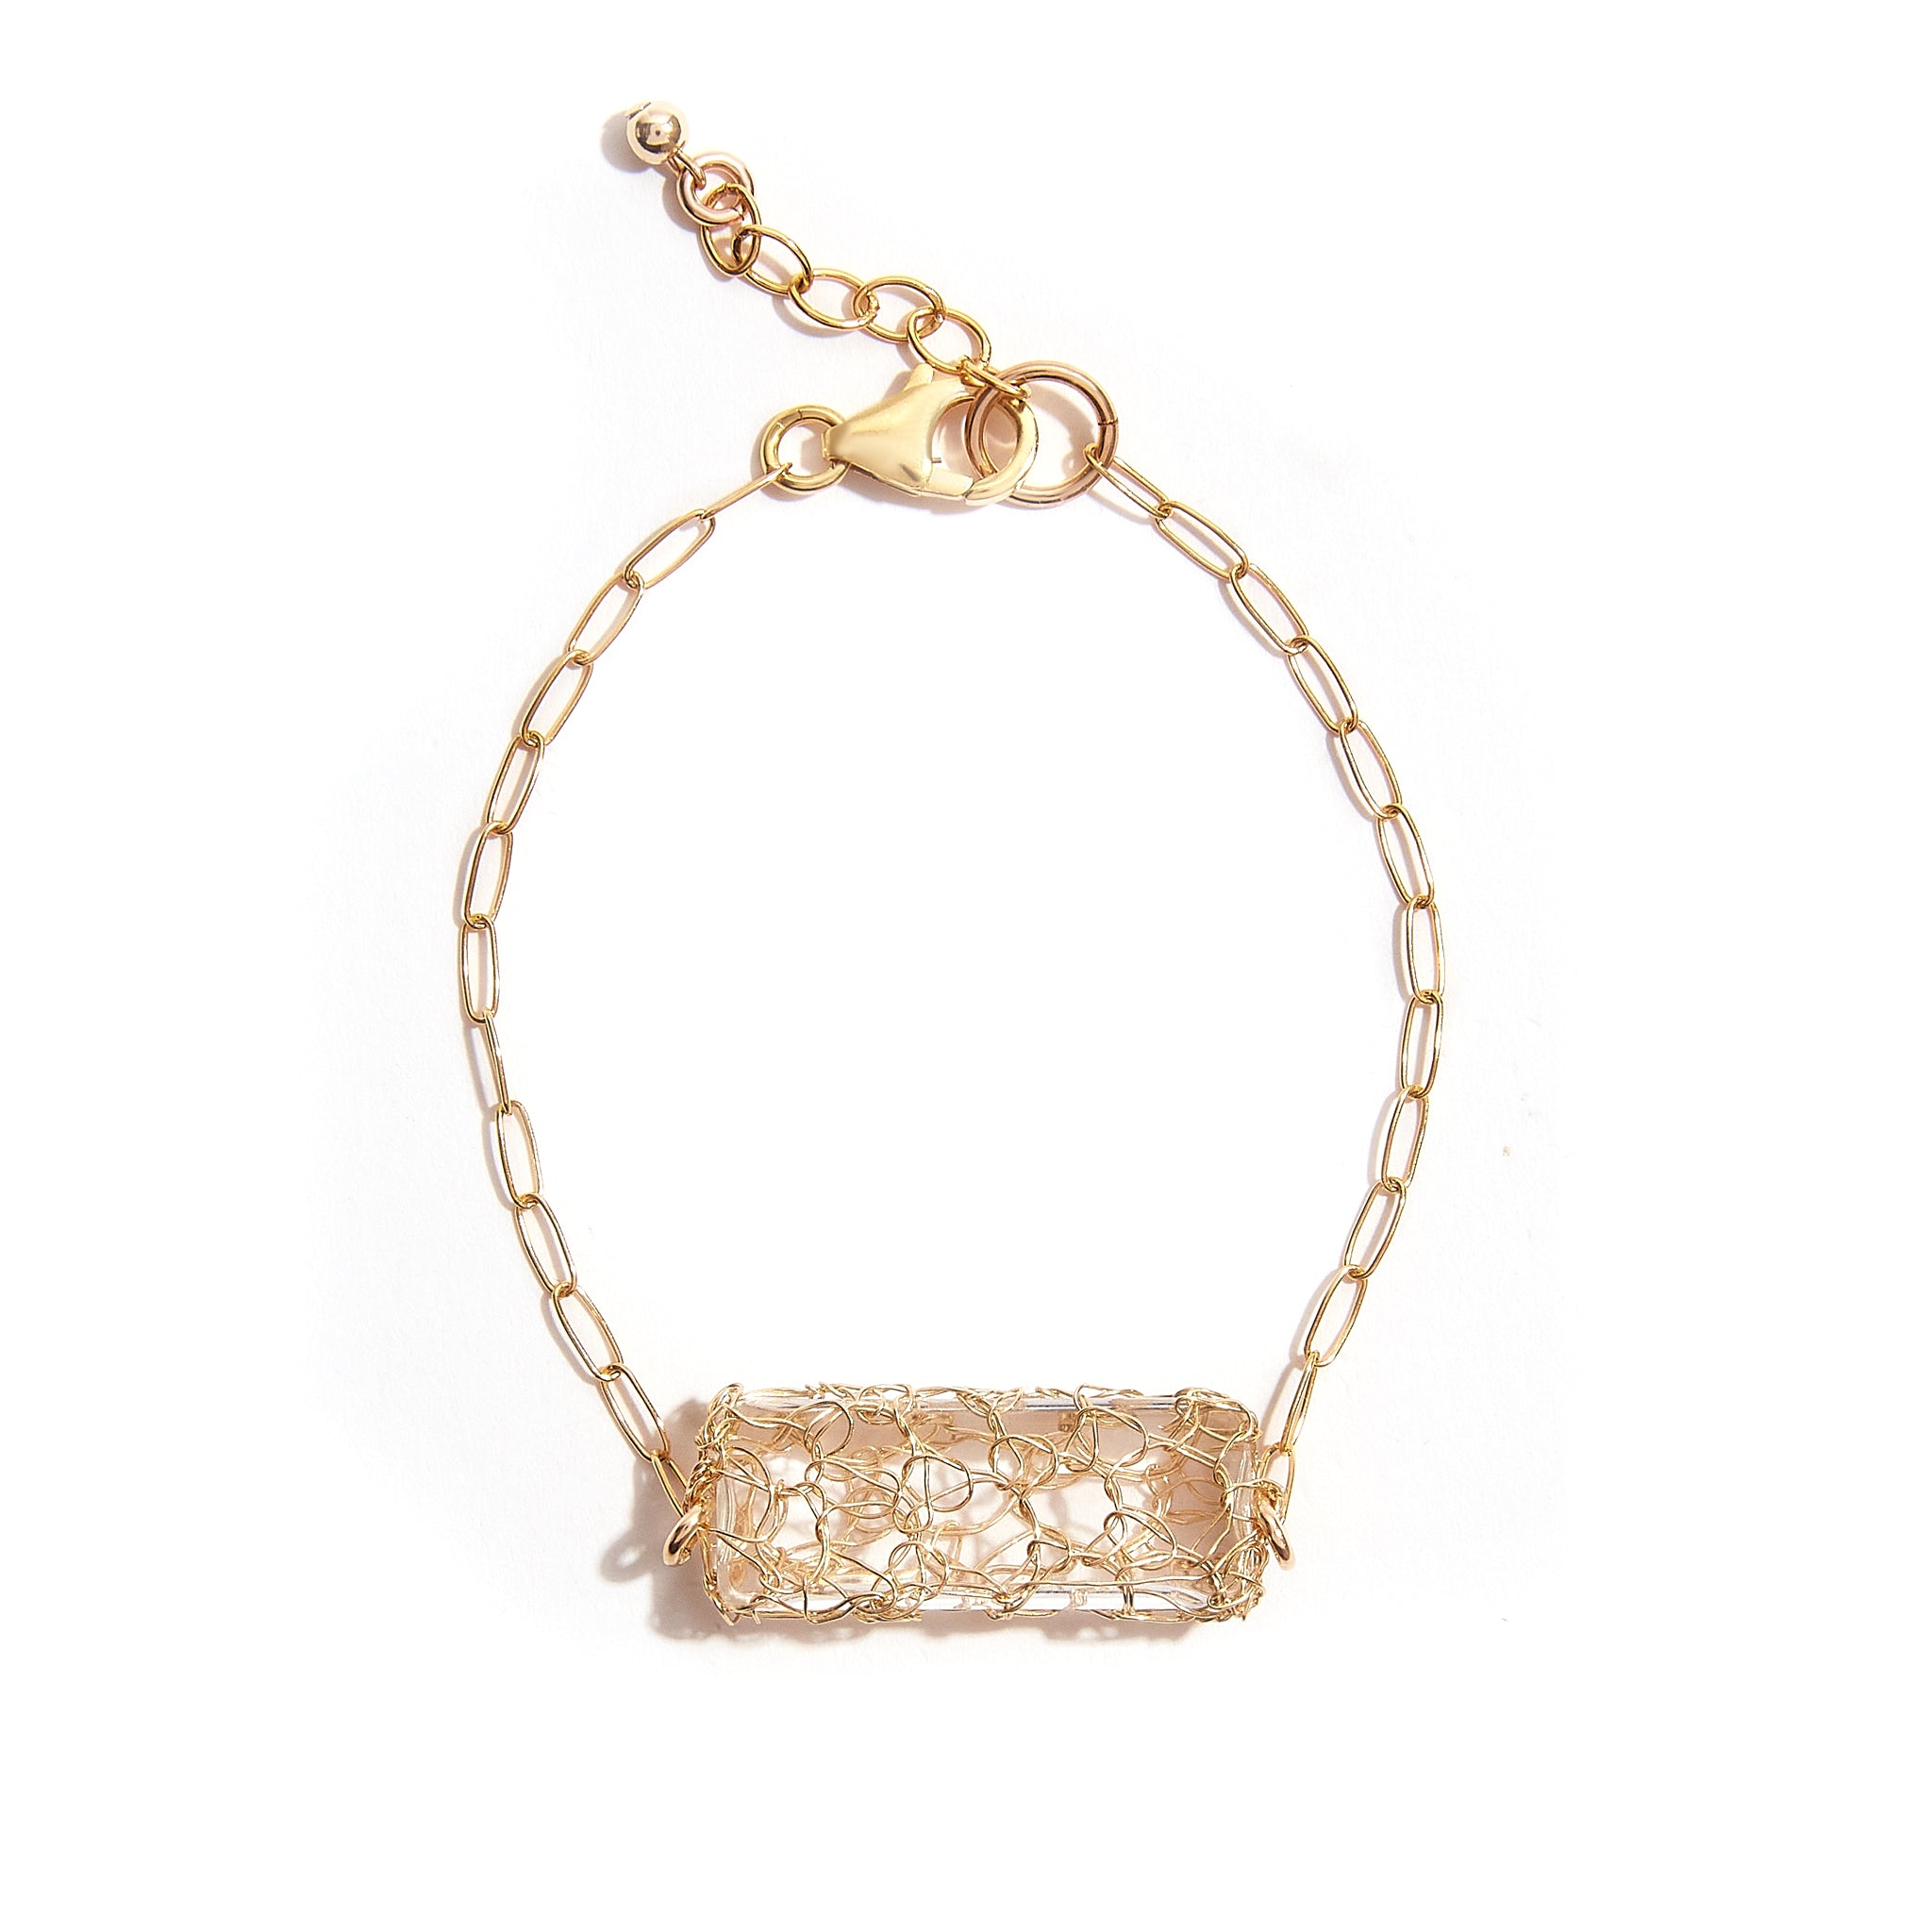 Step into sophistication with our Golden Glass Transparent Crochet Bracelet. This exquisite piece combines the timeless allure of goldfield with the modern elegance of rectangular transplanted glass. Elevate your style effortlessly with this unique and eye-catching accessory. Material: 14ct Gold-Filled. Design: Features rectangular transplanted glass, measuring 25x10mm, meticulously knitted into a full and intricate pattern.